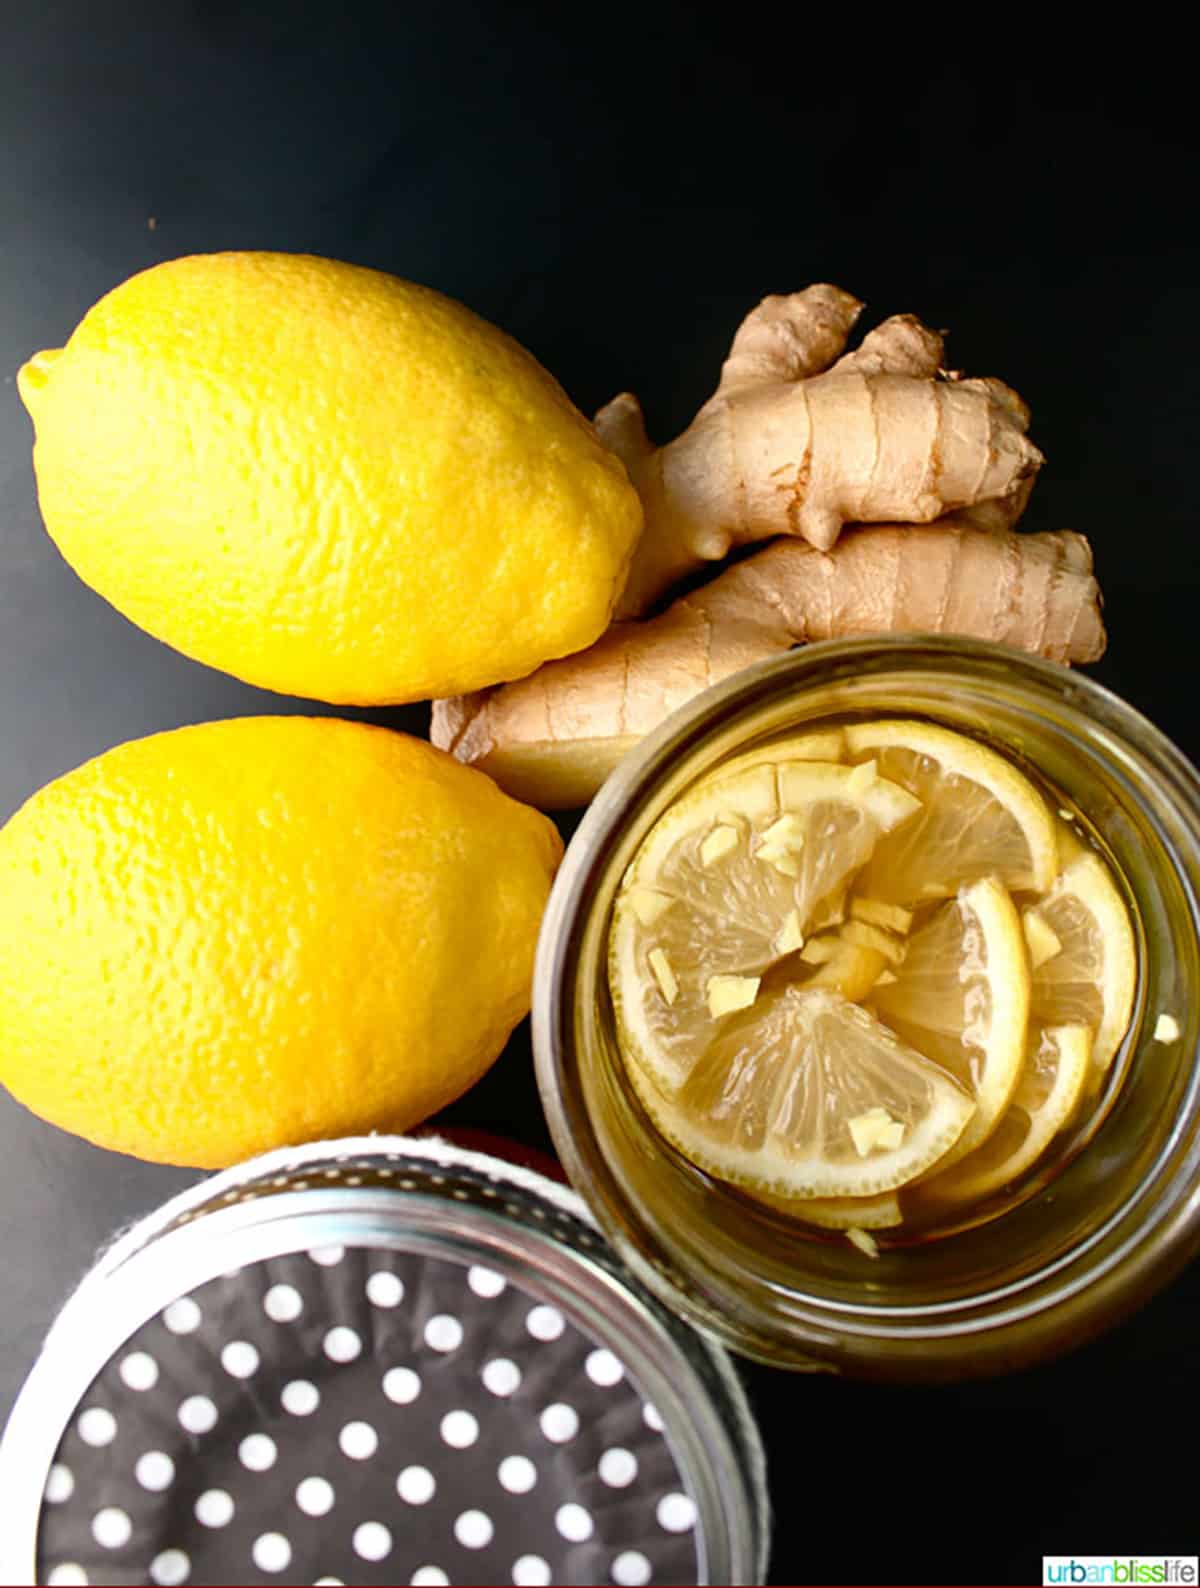 lemon, ginger and honey syrup with two fresh lemons and fresh ginger